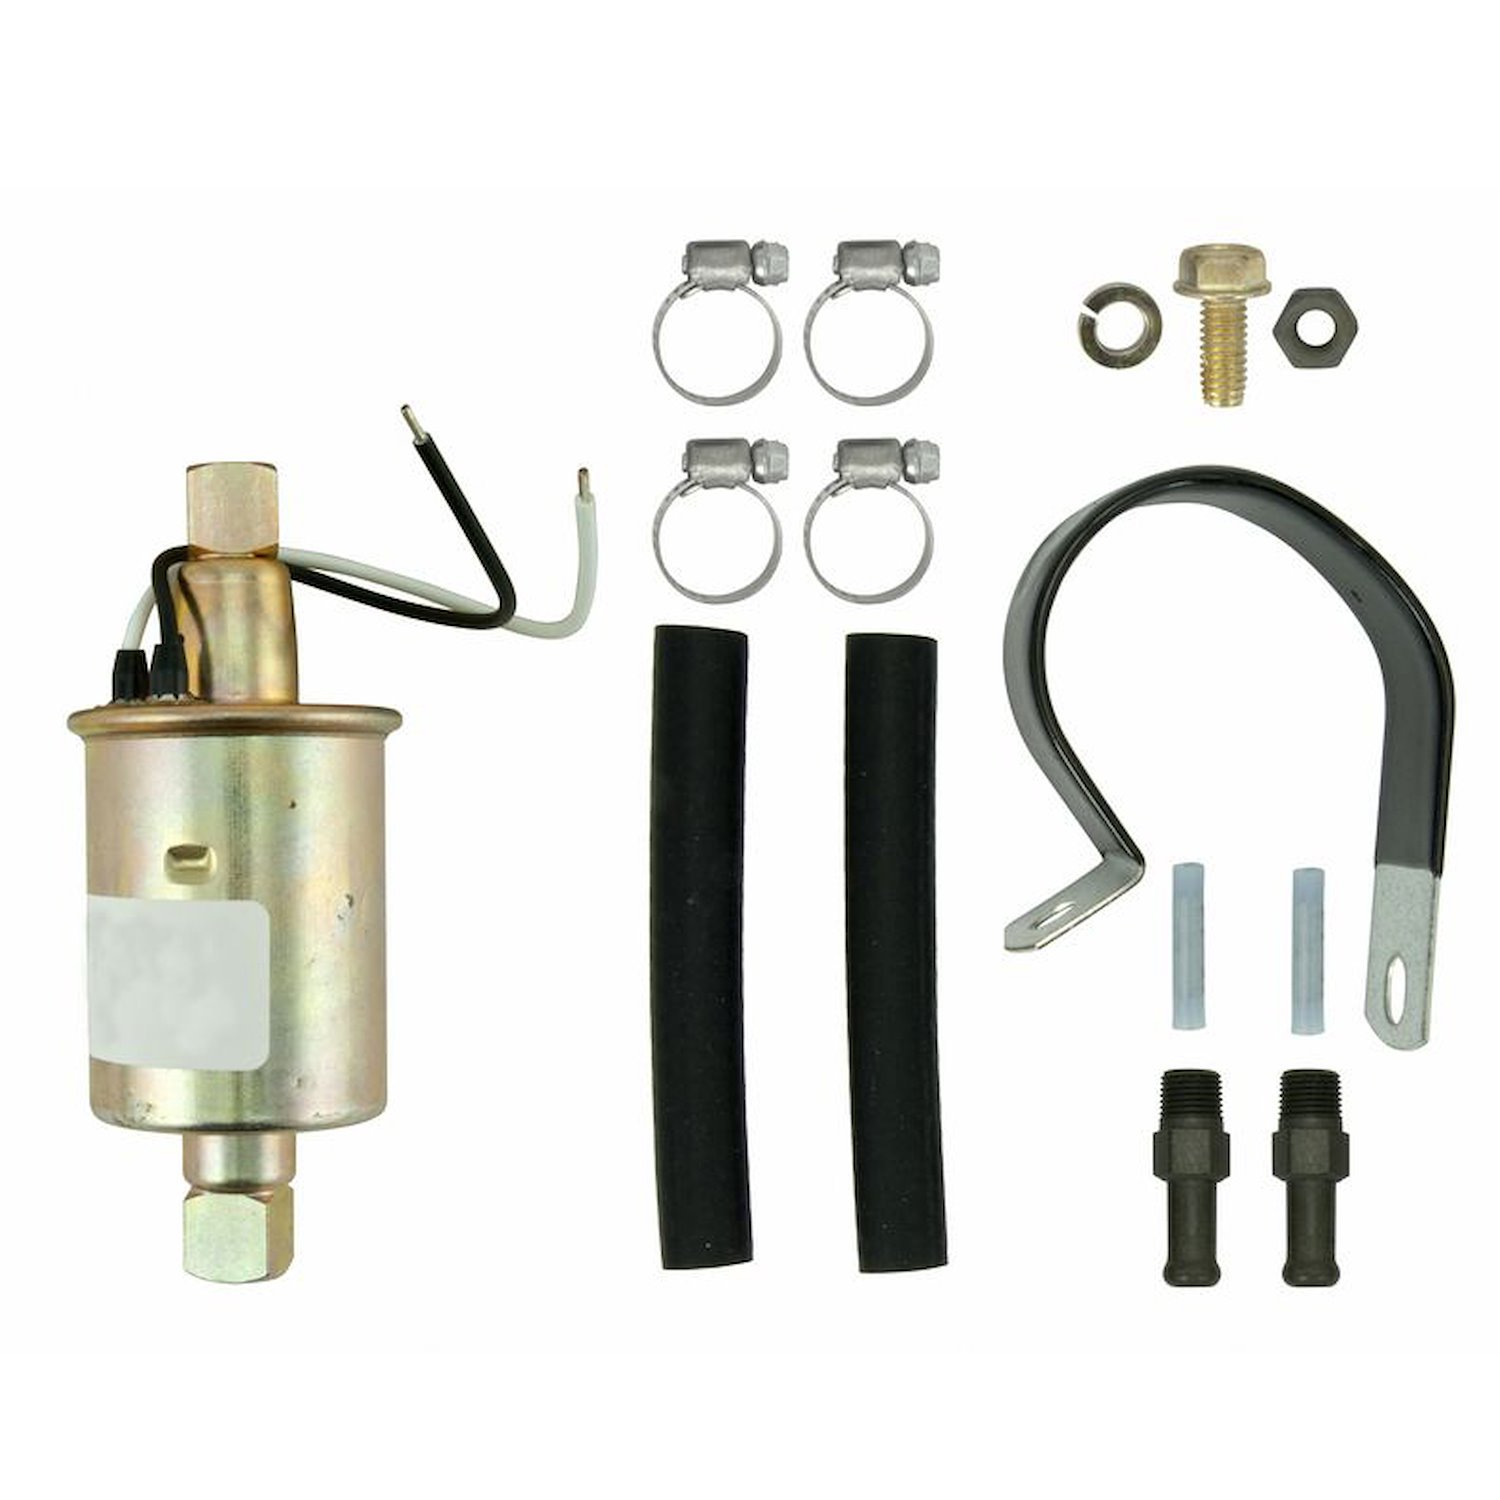 Replacement In Line Electric Fuel Pump for 1975-1981 Chevy LUV